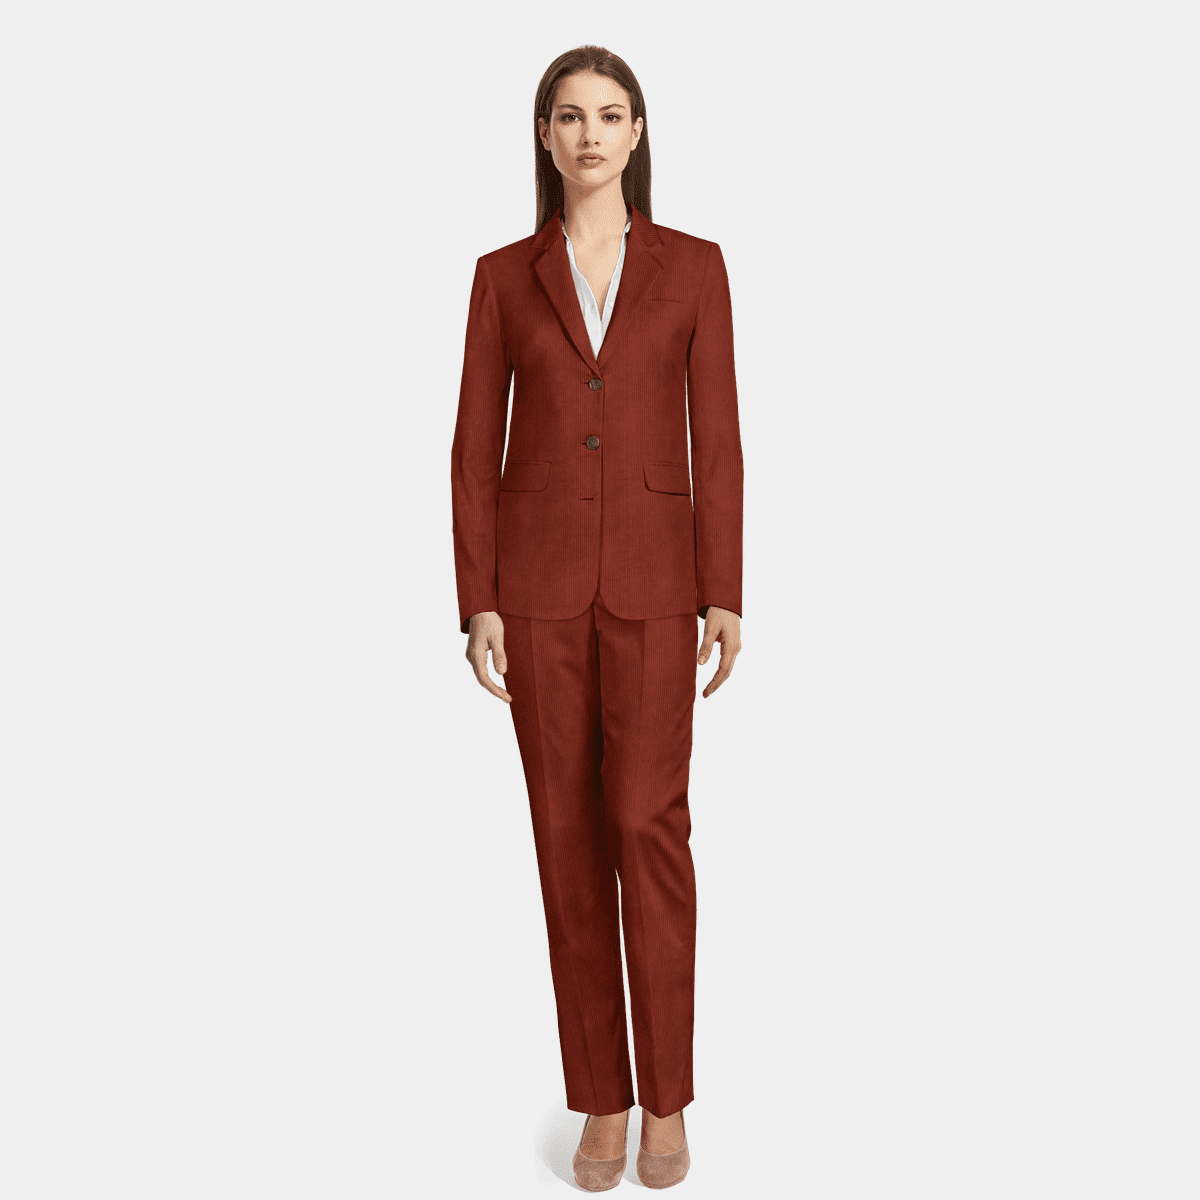 Champagne double breasted stretch Pant Suit - relaxed fit